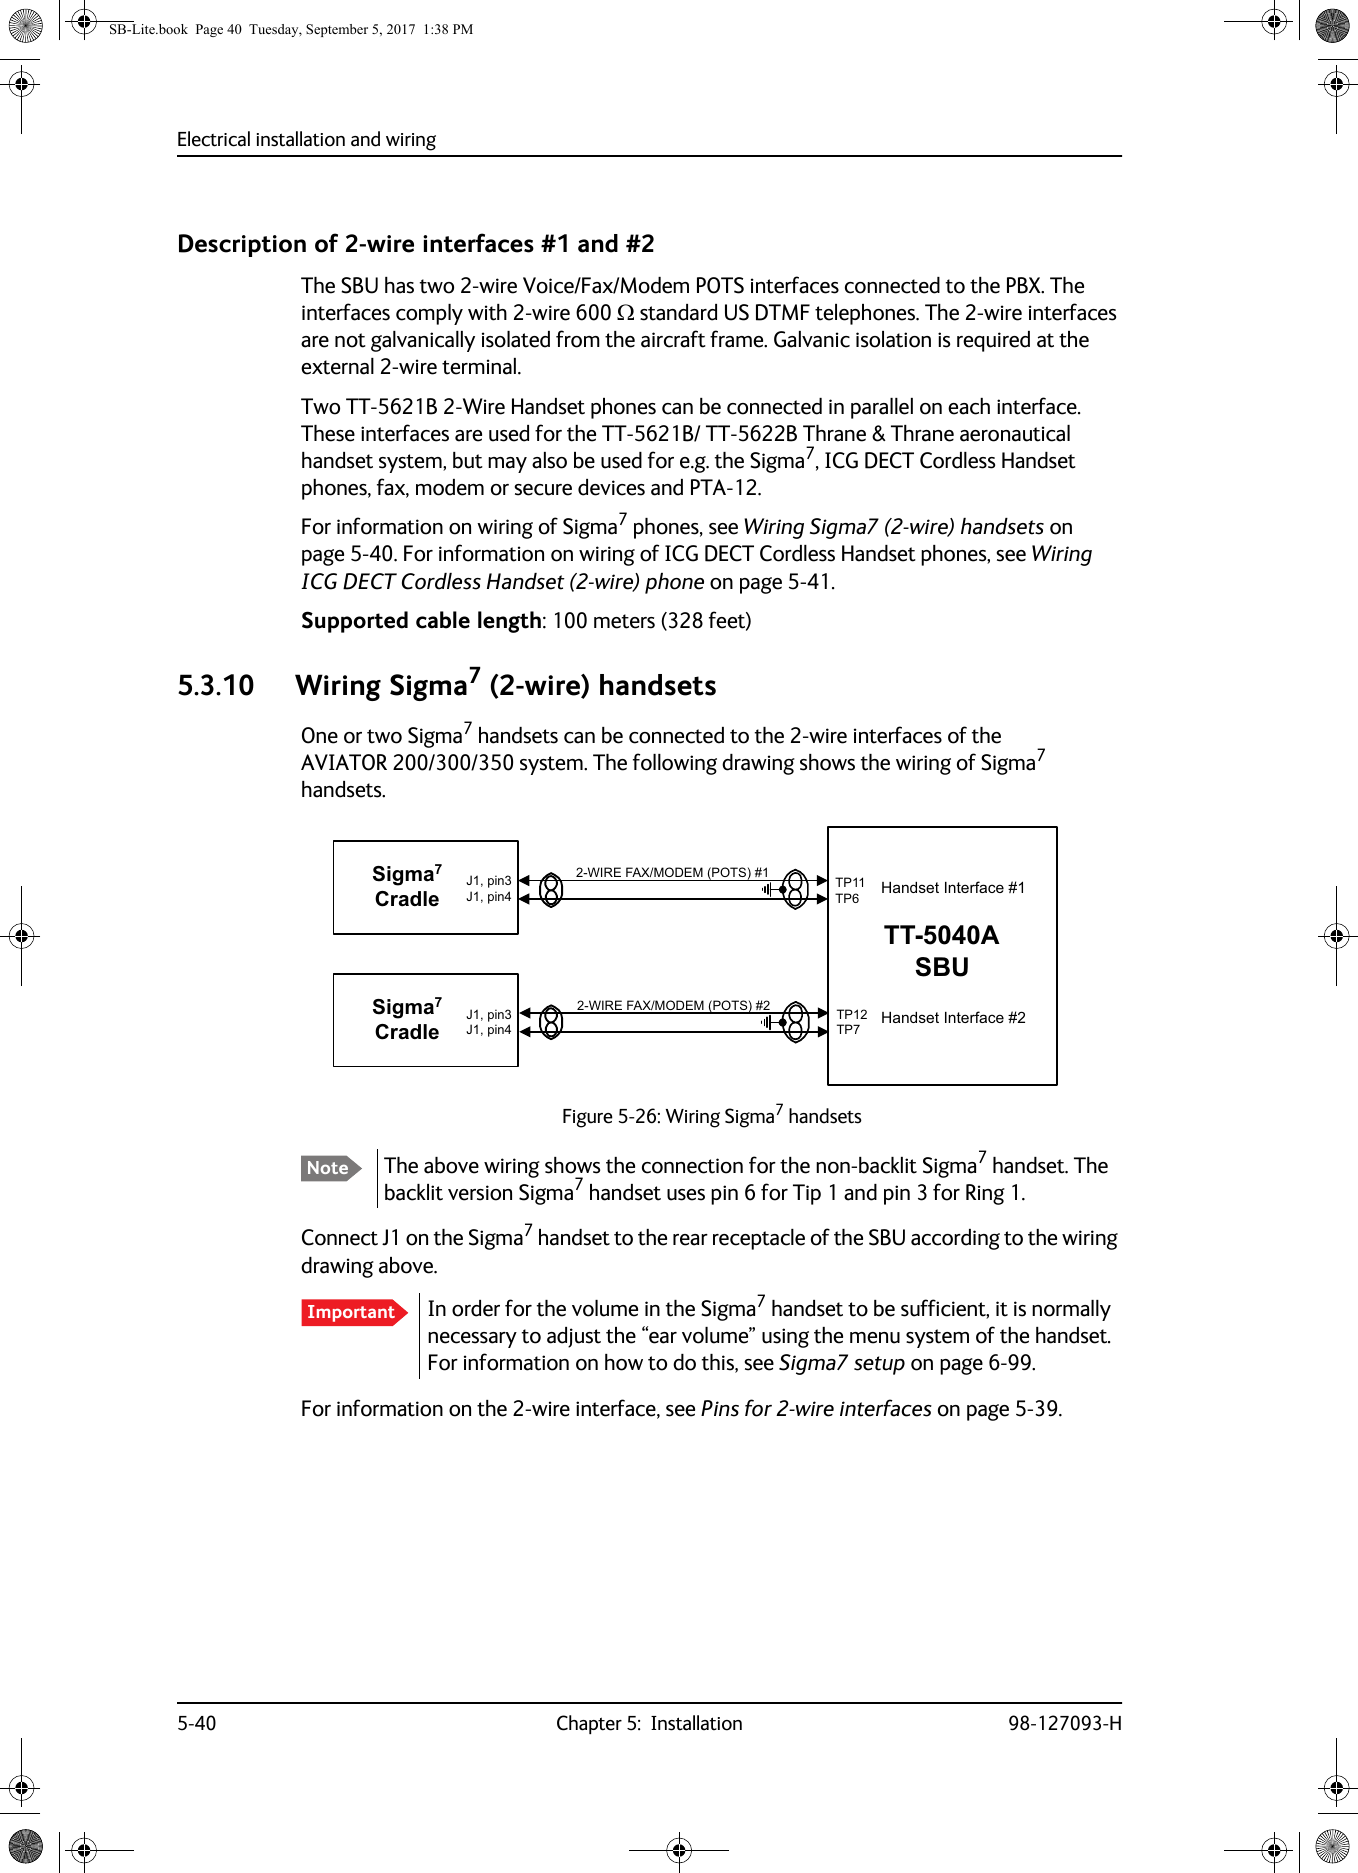 Electrical installation and wiring5-40 Chapter 5:  Installation 98-127093-HDescription of 2-wire interfaces #1 and #2The SBU has two 2-wire Voice/Fax/Modem POTS interfaces connected to the PBX. The interfaces comply with 2-wire 600  standard US DTMF telephones. The 2-wire interfaces are not galvanically isolated from the aircraft frame. Galvanic isolation is required at the external 2-wire terminal.Two TT-5621B 2-Wire Handset phones can be connected in parallel on each interface. These interfaces are used for the TT-5621B/ TT-5622B Thrane &amp; Thrane aeronautical handset system, but may also be used for e.g. the Sigma7, ICG DECT Cordless Handset phones, fax, modem or secure devices and PTA-12.For information on wiring of Sigma7 phones, see Wiring Sigma7 (2-wire) handsets on page  5-40. For information on wiring of ICG DECT Cordless Handset phones, see Wiring ICG DECT Cordless Handset (2-wire) phone on page  5-41.Supported cable length: 100 meters (328 feet)5.3.10 Wiring Sigma7 (2-wire) handsetsOne or two Sigma7 handsets can be connected to the 2-wire interfaces of the AVIATOR  200/300/350 system. The following drawing shows the wiring of Sigma7 handsets.Figure 5-26:  Wiring Sigma7 handsetsThe above wiring shows the connection for the non-backlit Sigma7 handset. The backlit version Sigma7 handset uses pin 6 for Tip 1 and pin 3 for Ring 1.Connect J1 on the Sigma7 handset to the rear receptacle of the SBU according to the wiring drawing above.In order for the volume in the Sigma7 handset to be sufficient, it is normally necessary to adjust the “ear volume” using the menu system of the handset. For information on how to do this, see Sigma7 setup on page  6-99.For information on the 2-wire interface, see Pins for 2-wire interfaces on page  5-39.NoteImportant:,5()$;02&apos;(032766LJPD&amp;UDGOH:,5()$;02&apos;(0327677$6%873737373-SLQ-SLQ6LJPD&amp;UDGOH-SLQ-SLQ+DQGVHW,QWHUIDFH+DQGVHW,QWHUIDFHSB-Lite.book  Page 40  Tuesday, September 5, 2017  1:38 PM